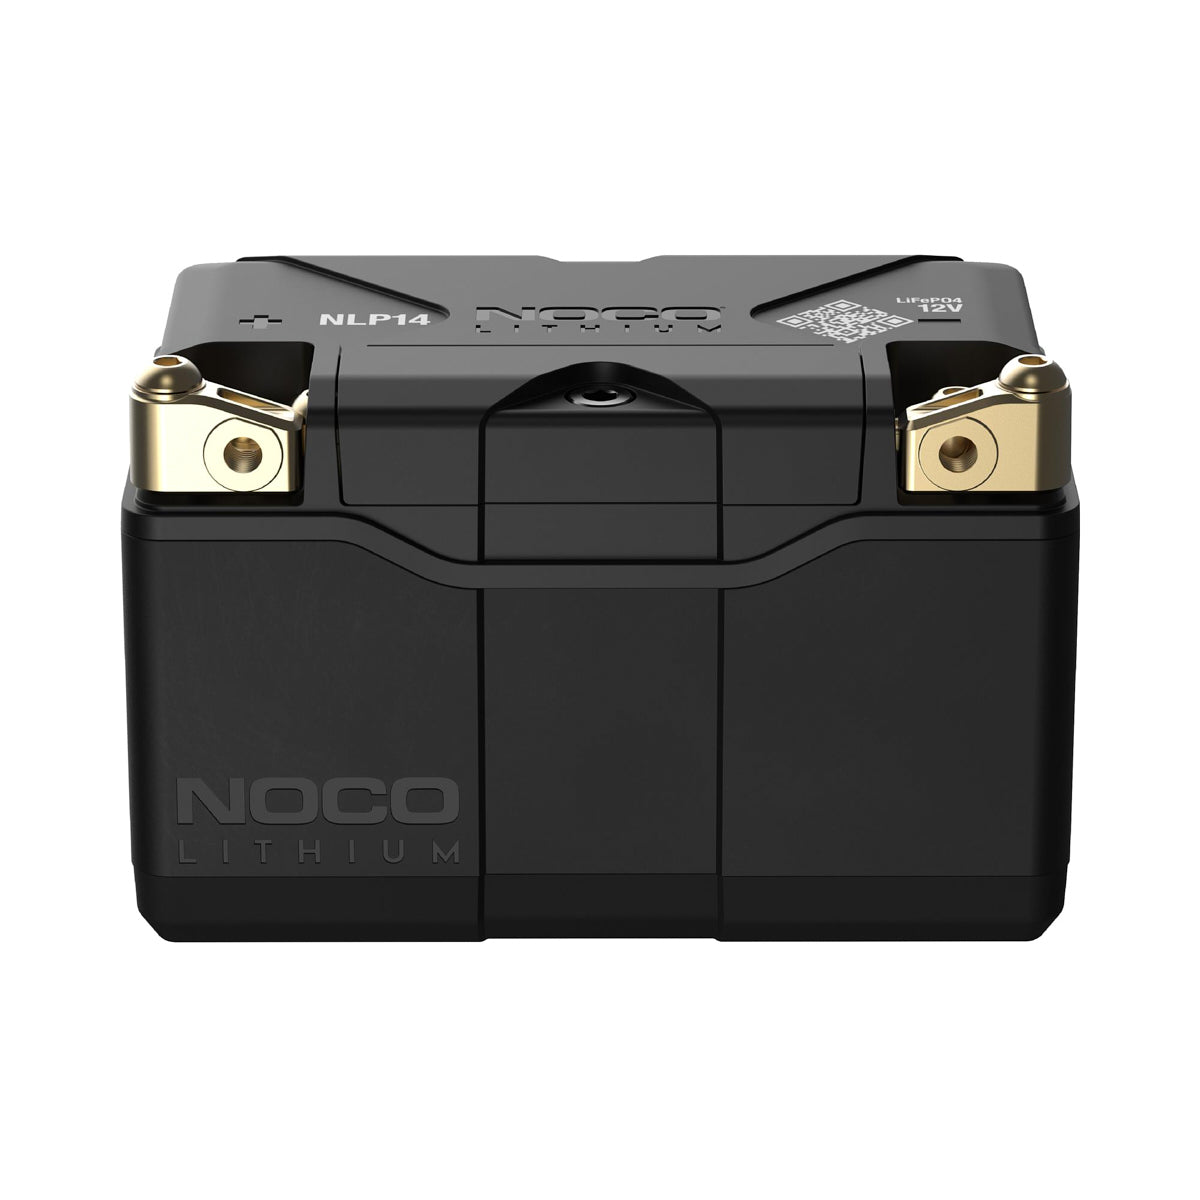 NOCO Battery Group 14 Lithium Powersports 500A NOCNLP14